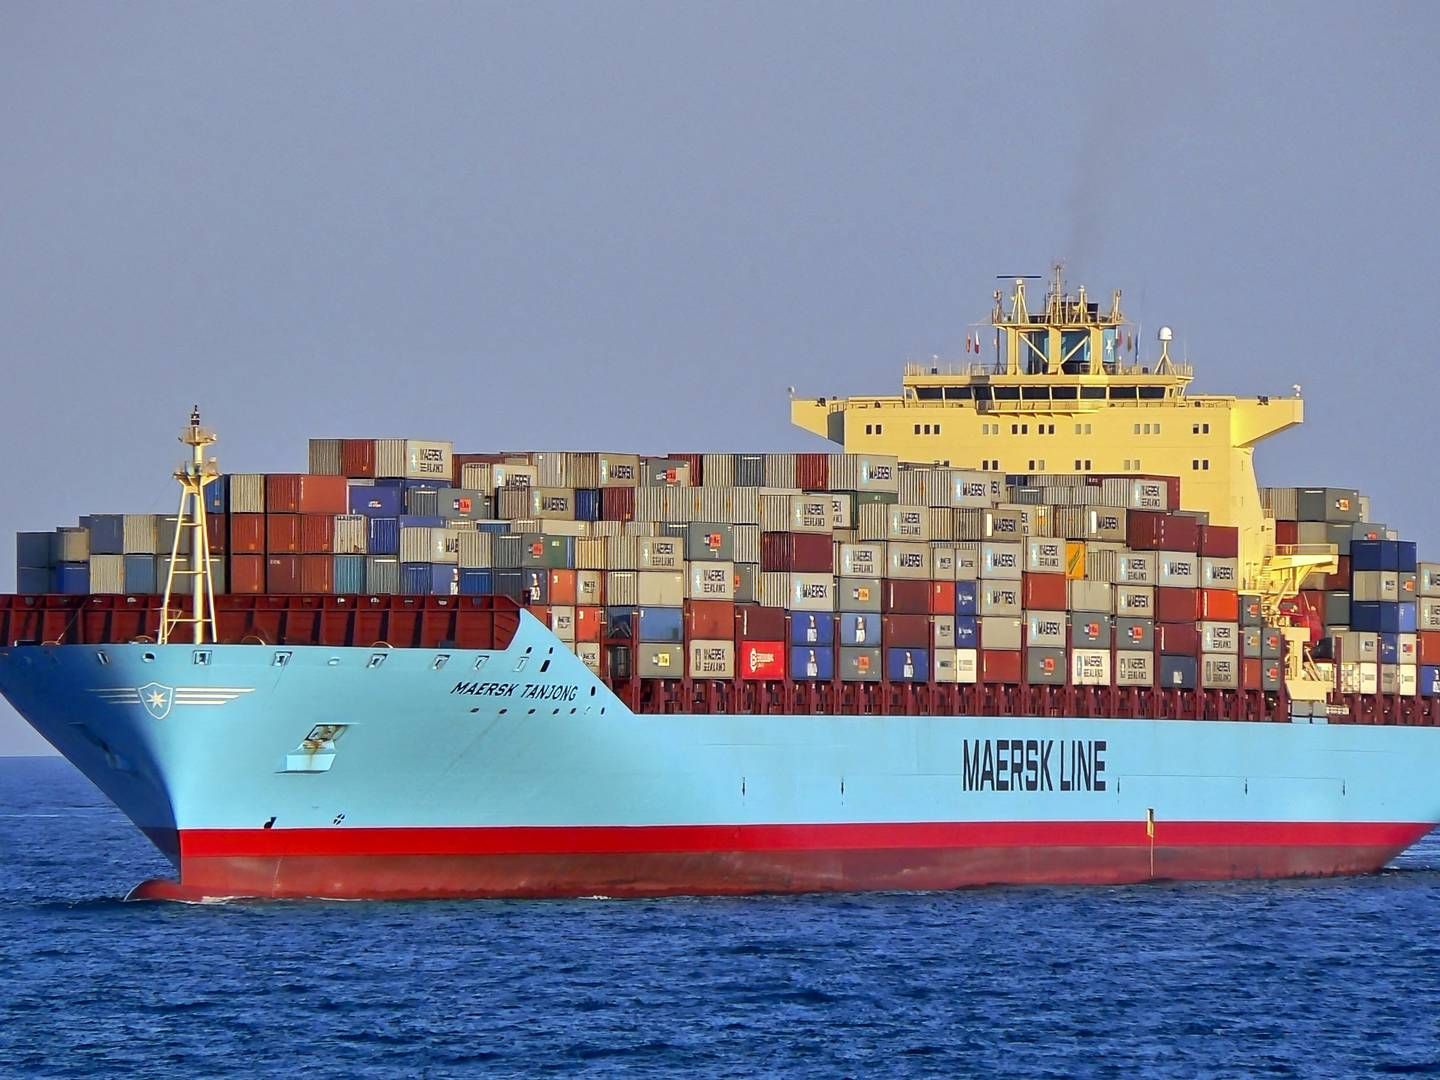 Since 2019, there has been a ”gradual slowdown” of some vessels, which helped prevent some of the overcapacity in the market. However, in 2023, a large number of new vessels were delivered, which again caused capacity to increase.